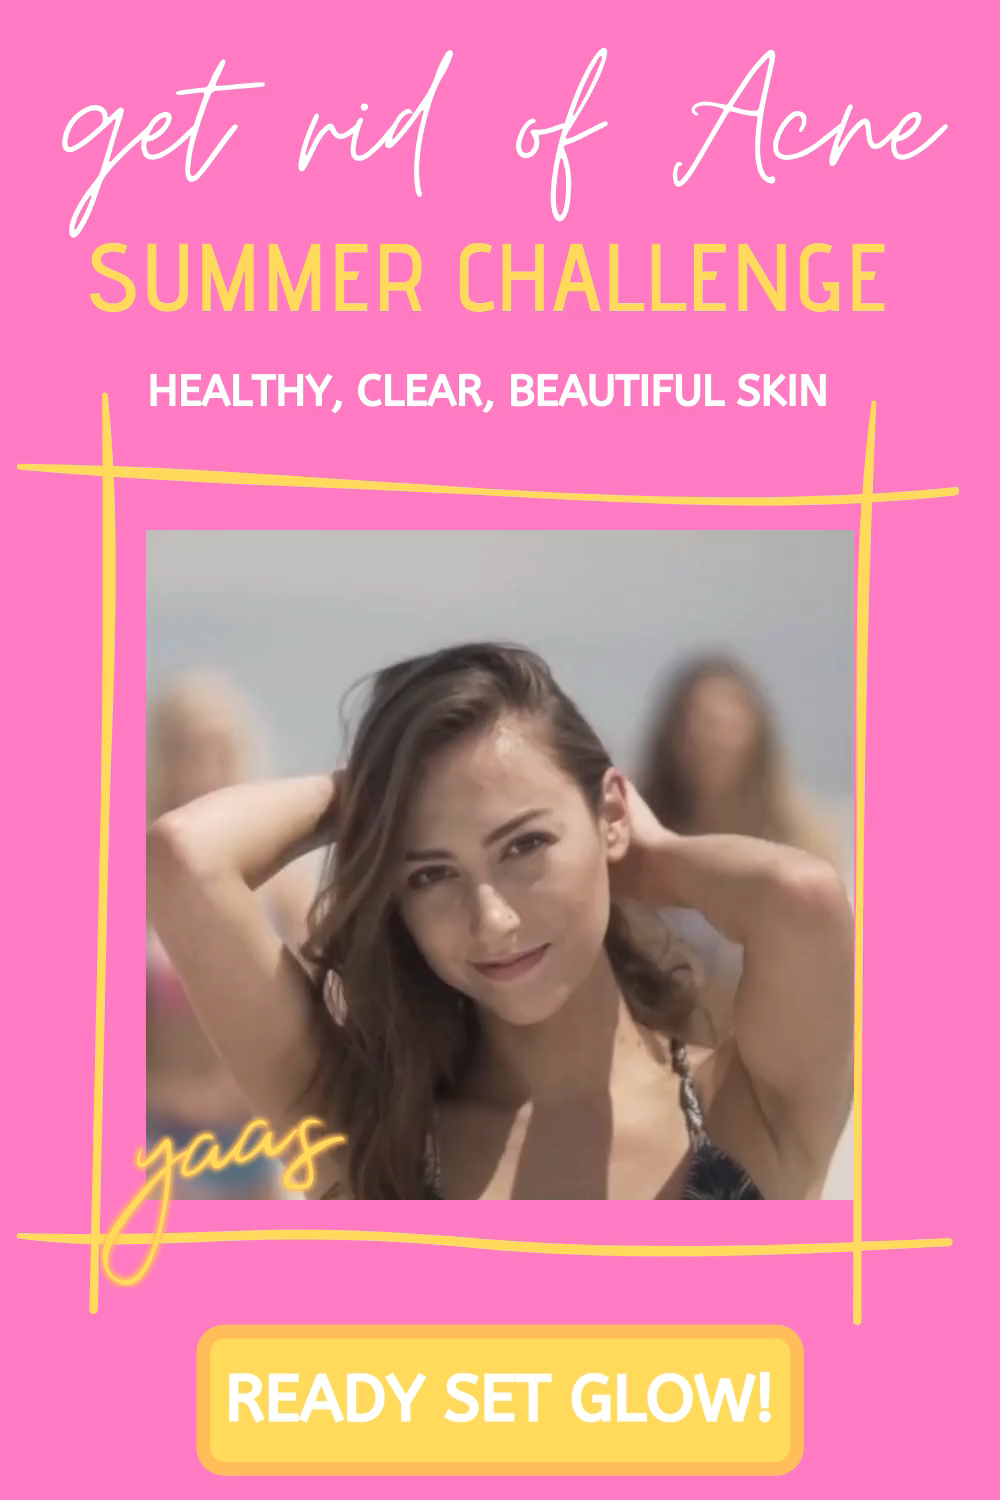 Get rid of acne summer challenge join today ! - Get rid of acne summer challenge join today ! -   18 medical beauty Treatments ideas